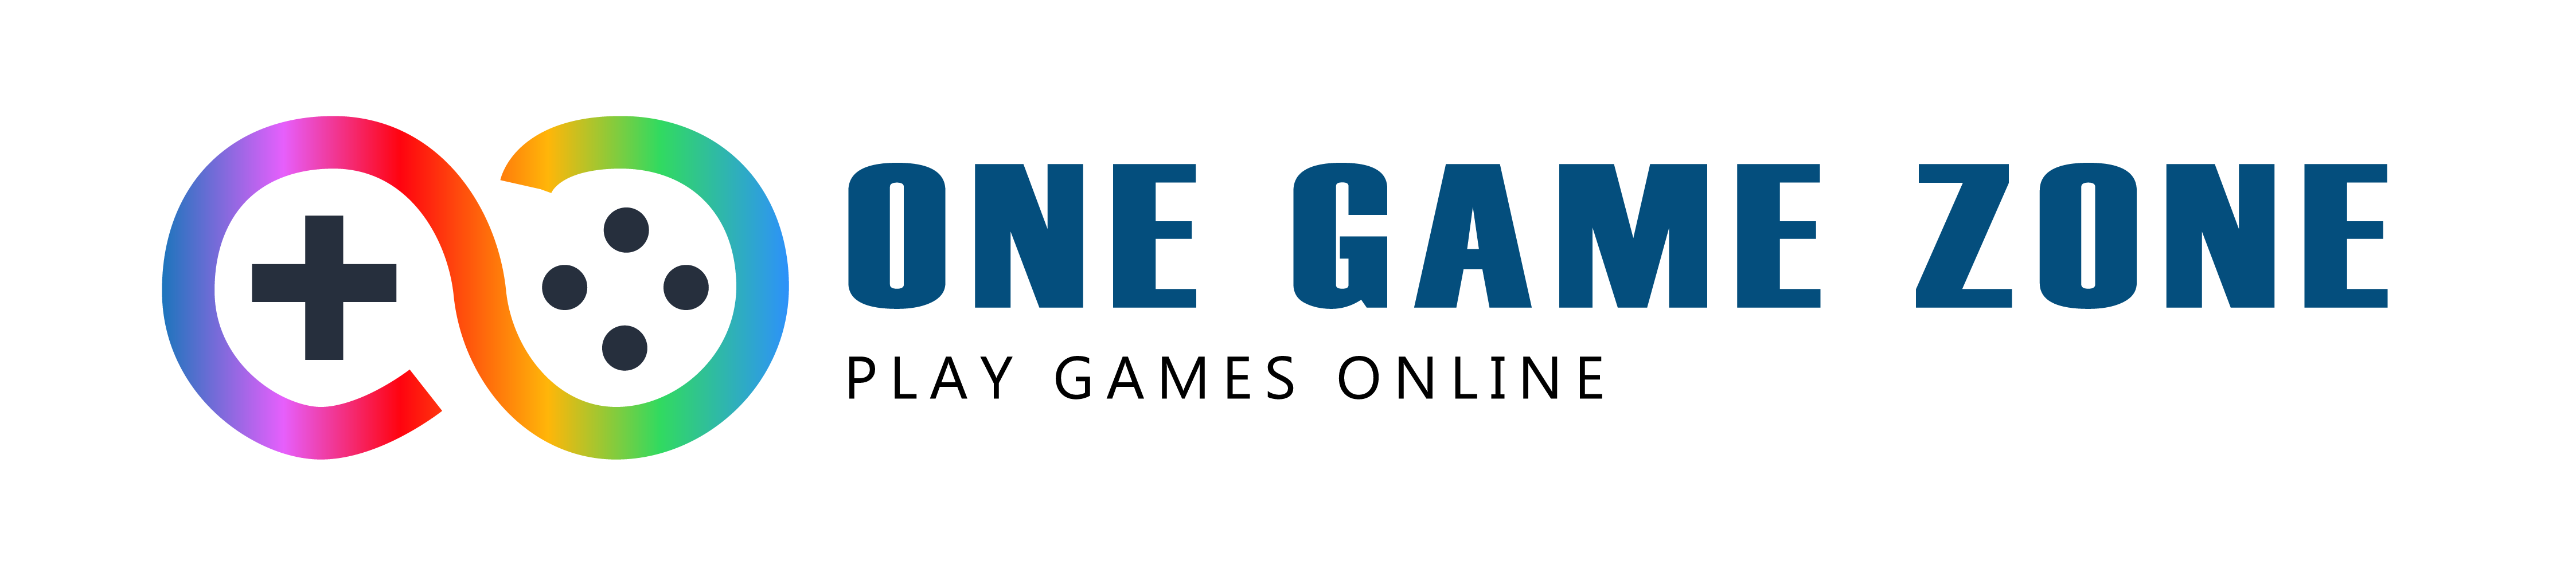 One Game Zone | Play Online Games